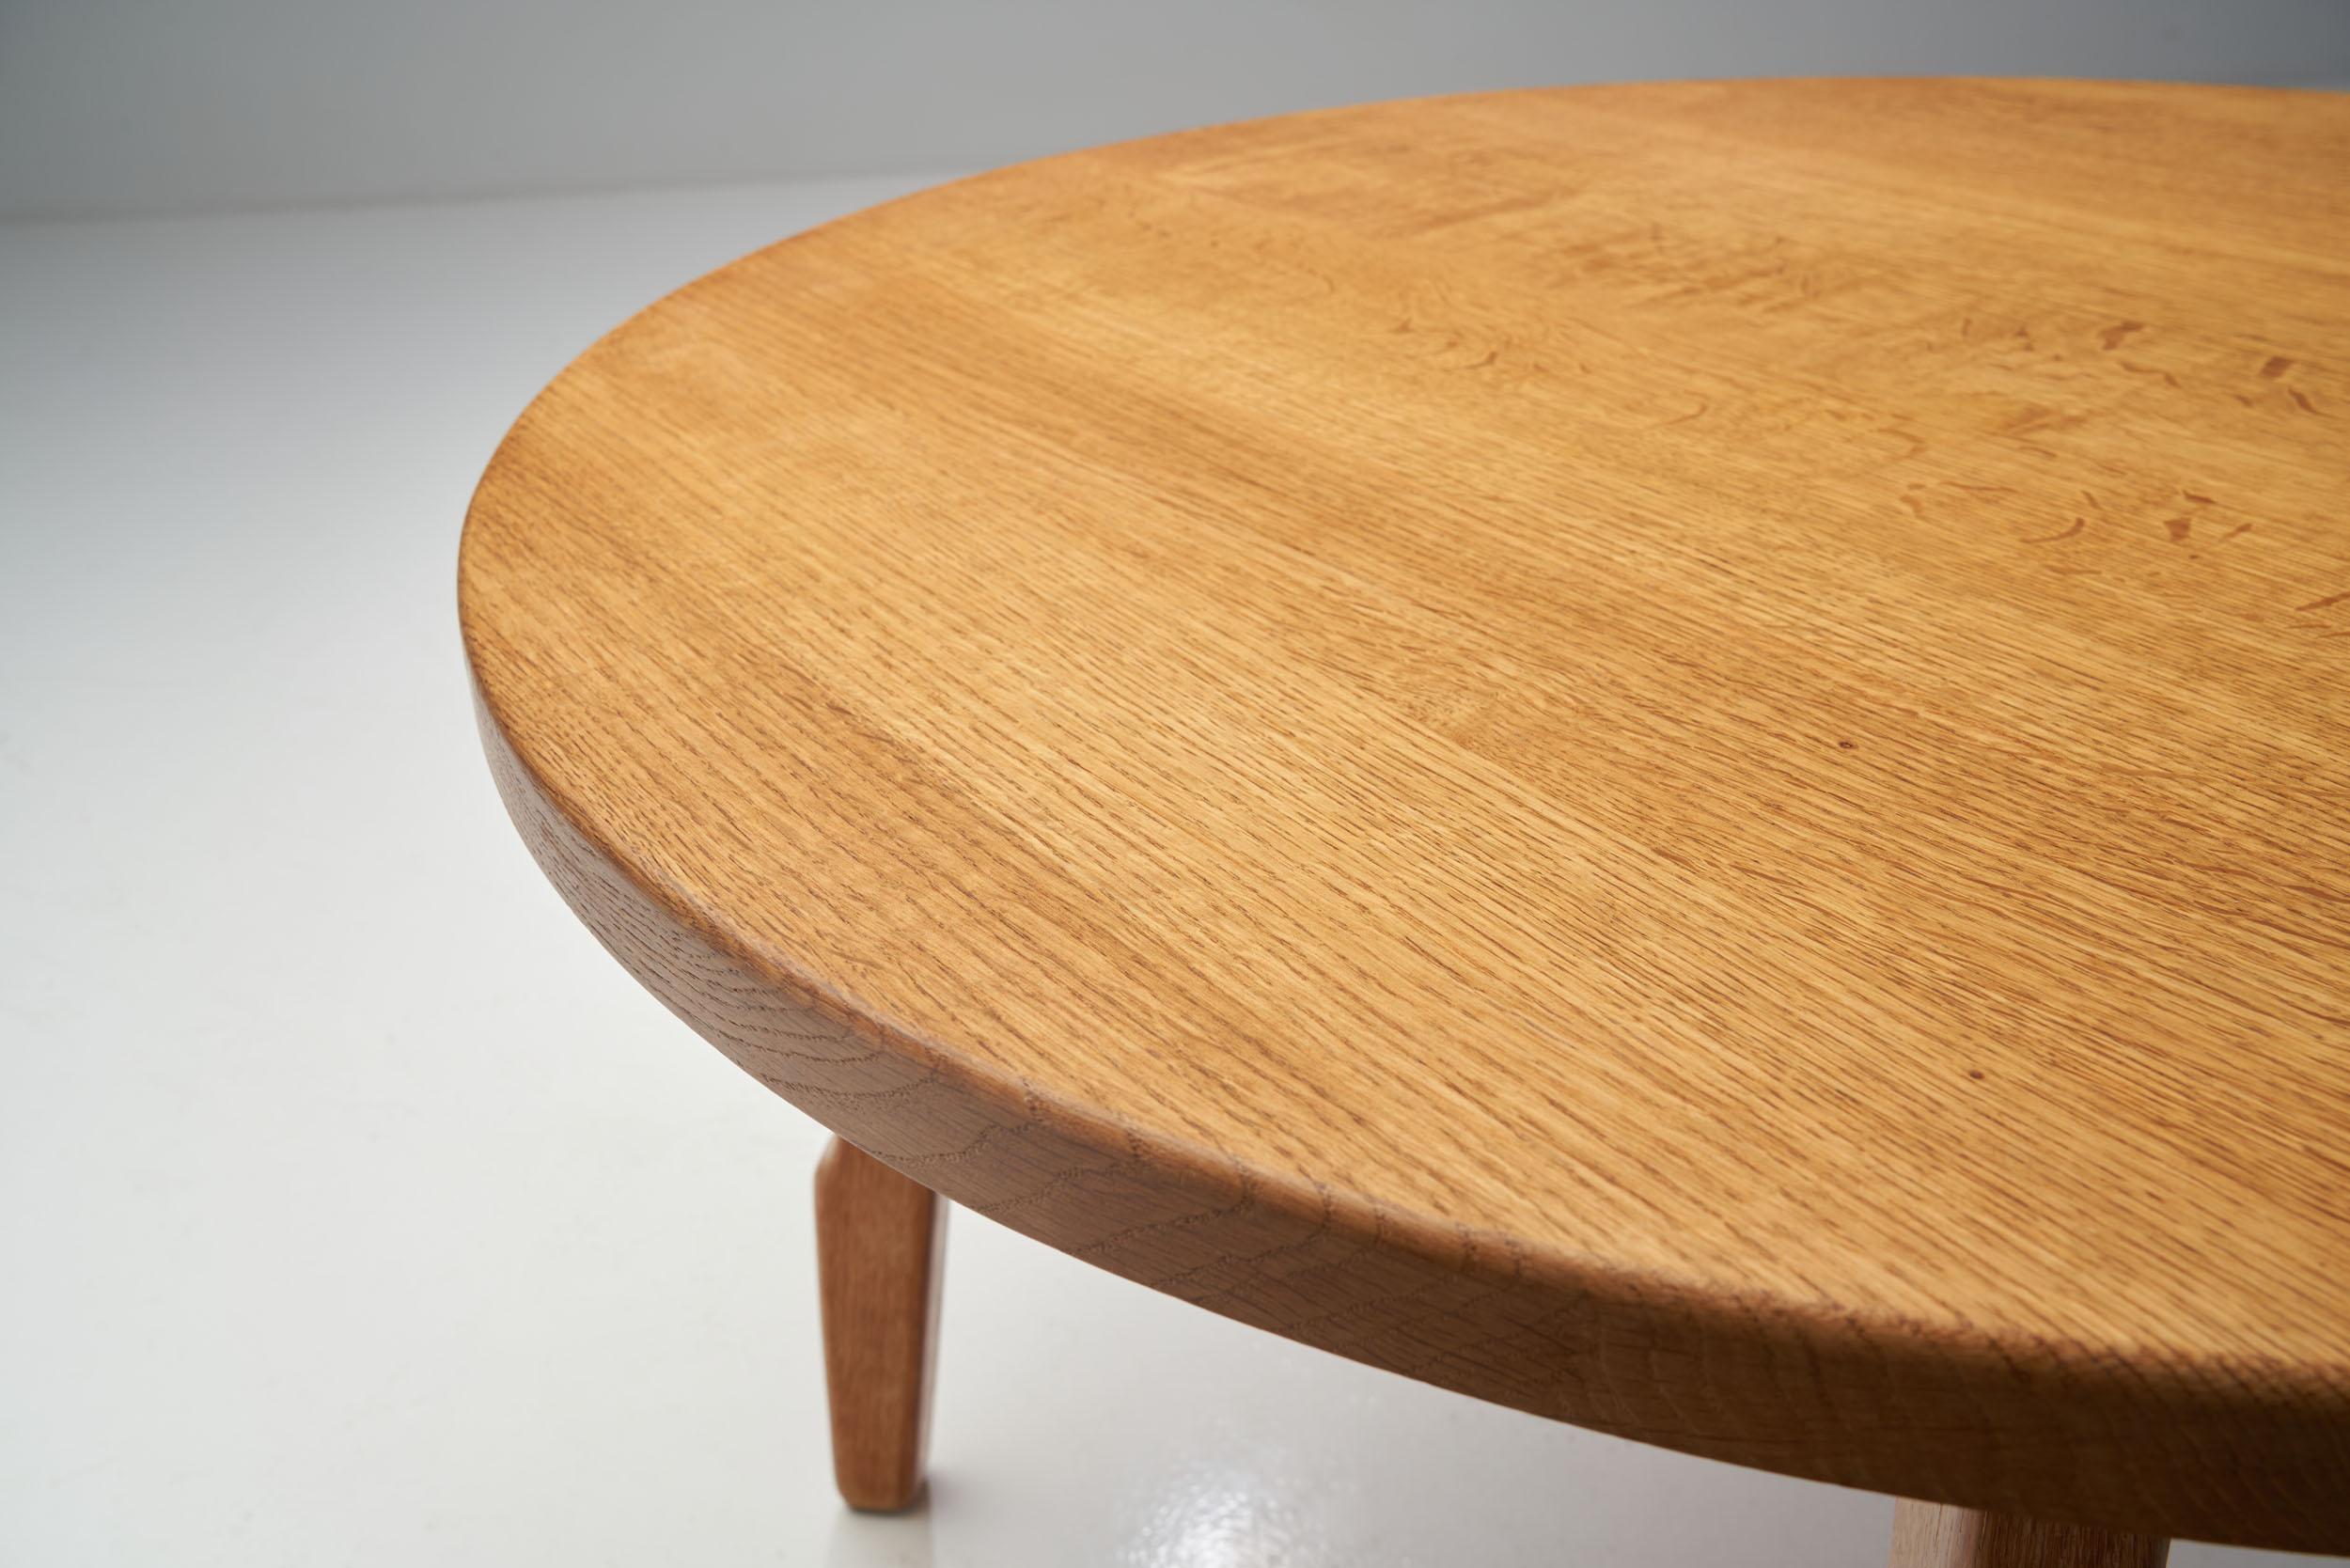 Wood Solid Oak Coffee Table with Sculptural Legs, Denmark, ca 1950s For Sale